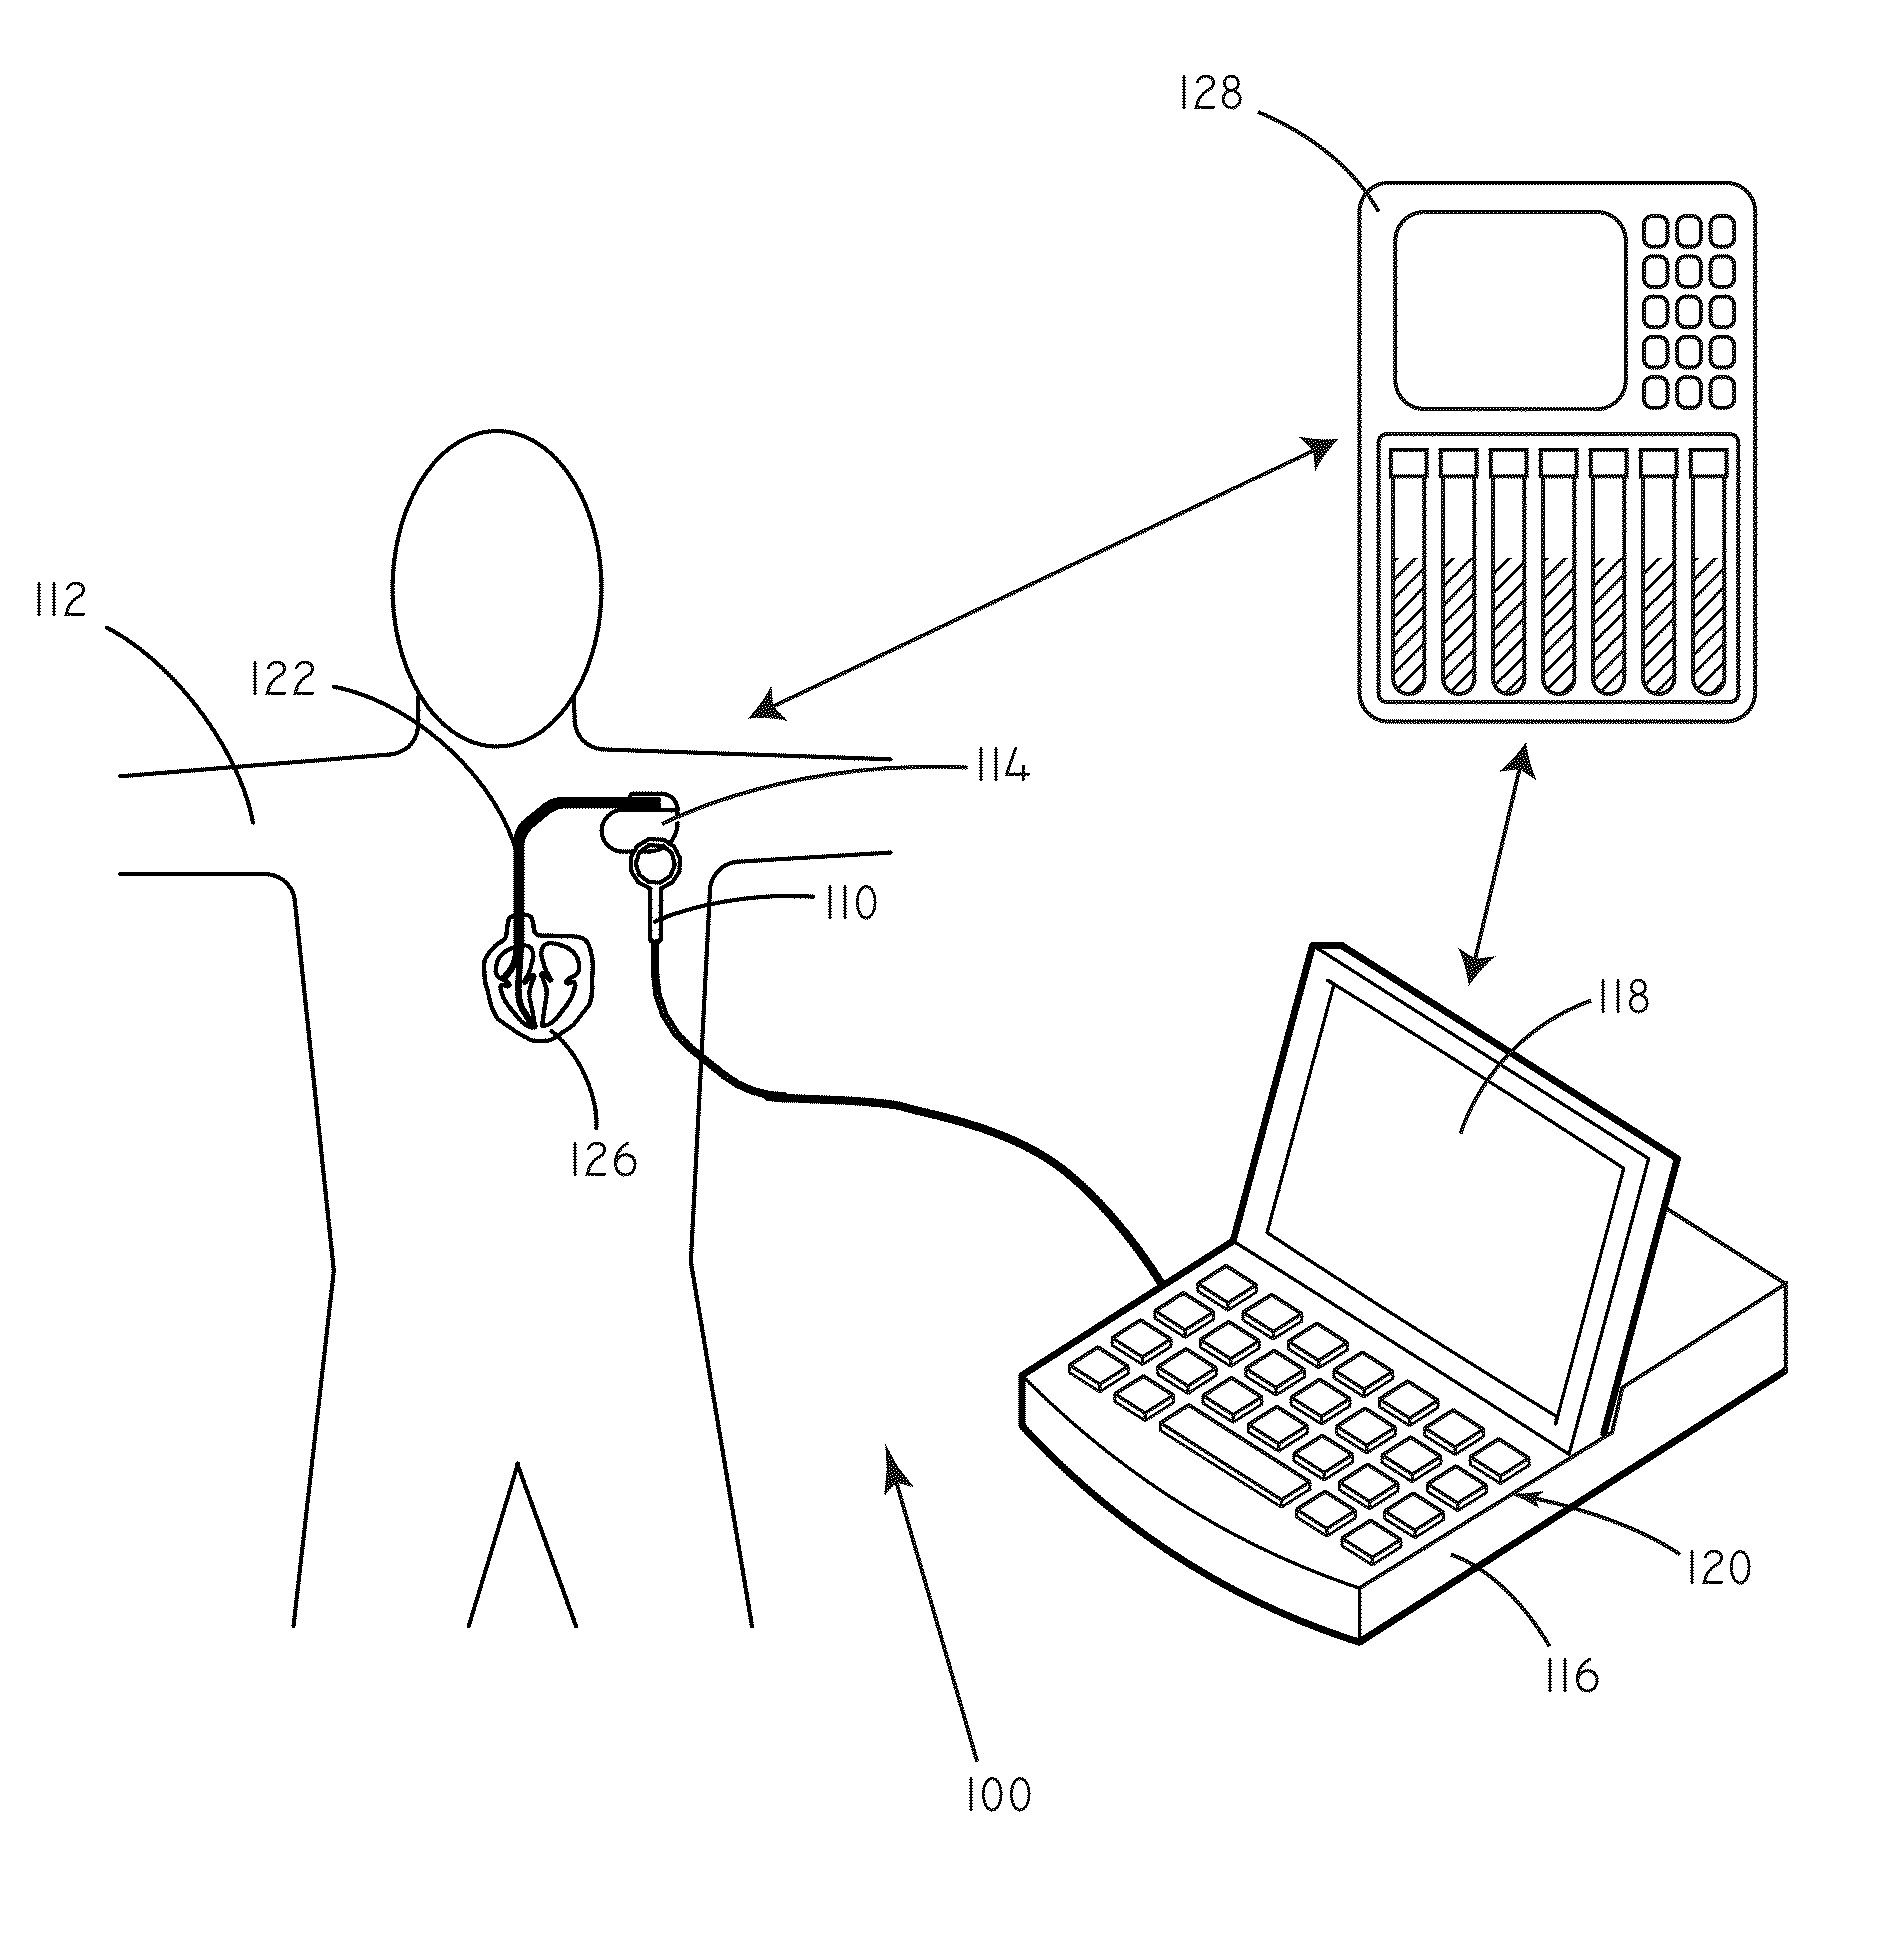 Systems and methods for setting parameters of implantable medical devices using predictive marker data